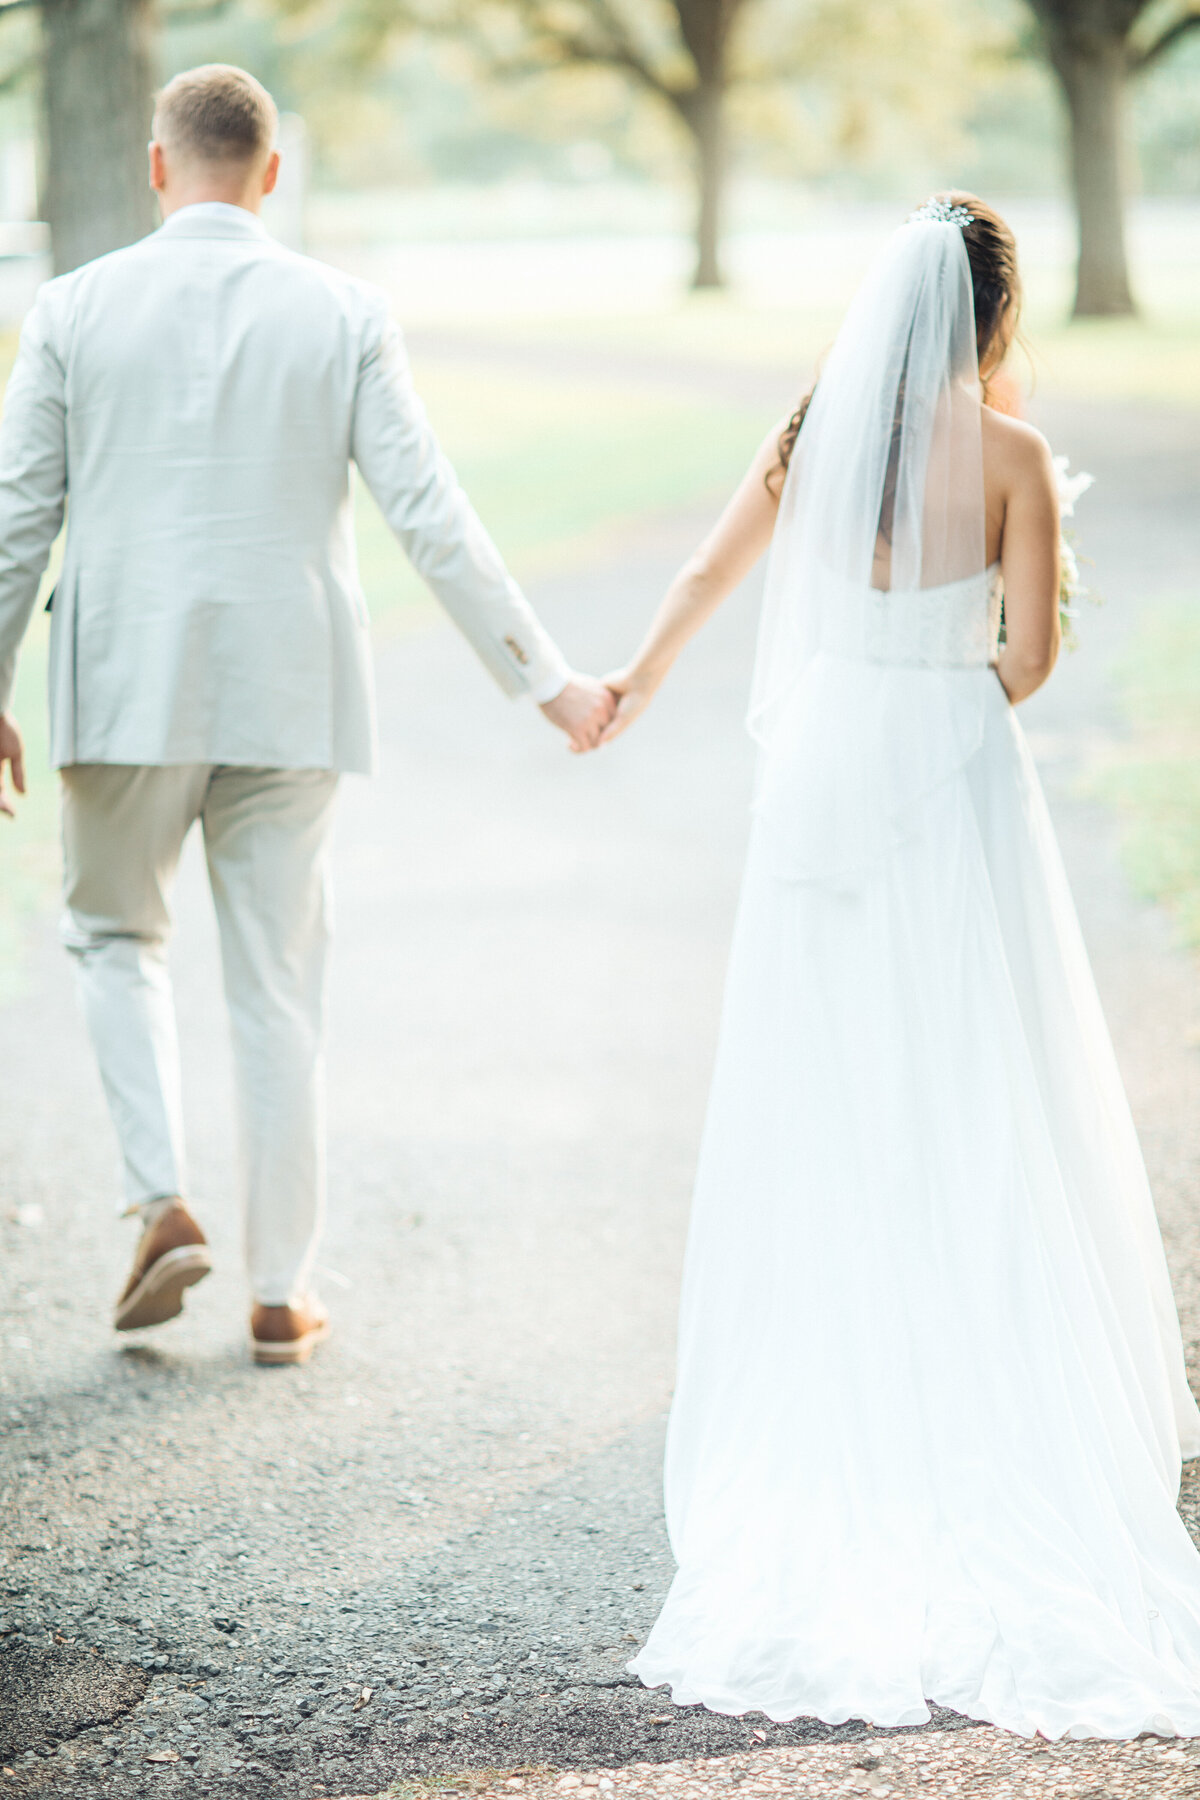 Wedding Photograph Of Bride And Groom Holding Their Hands While Walking